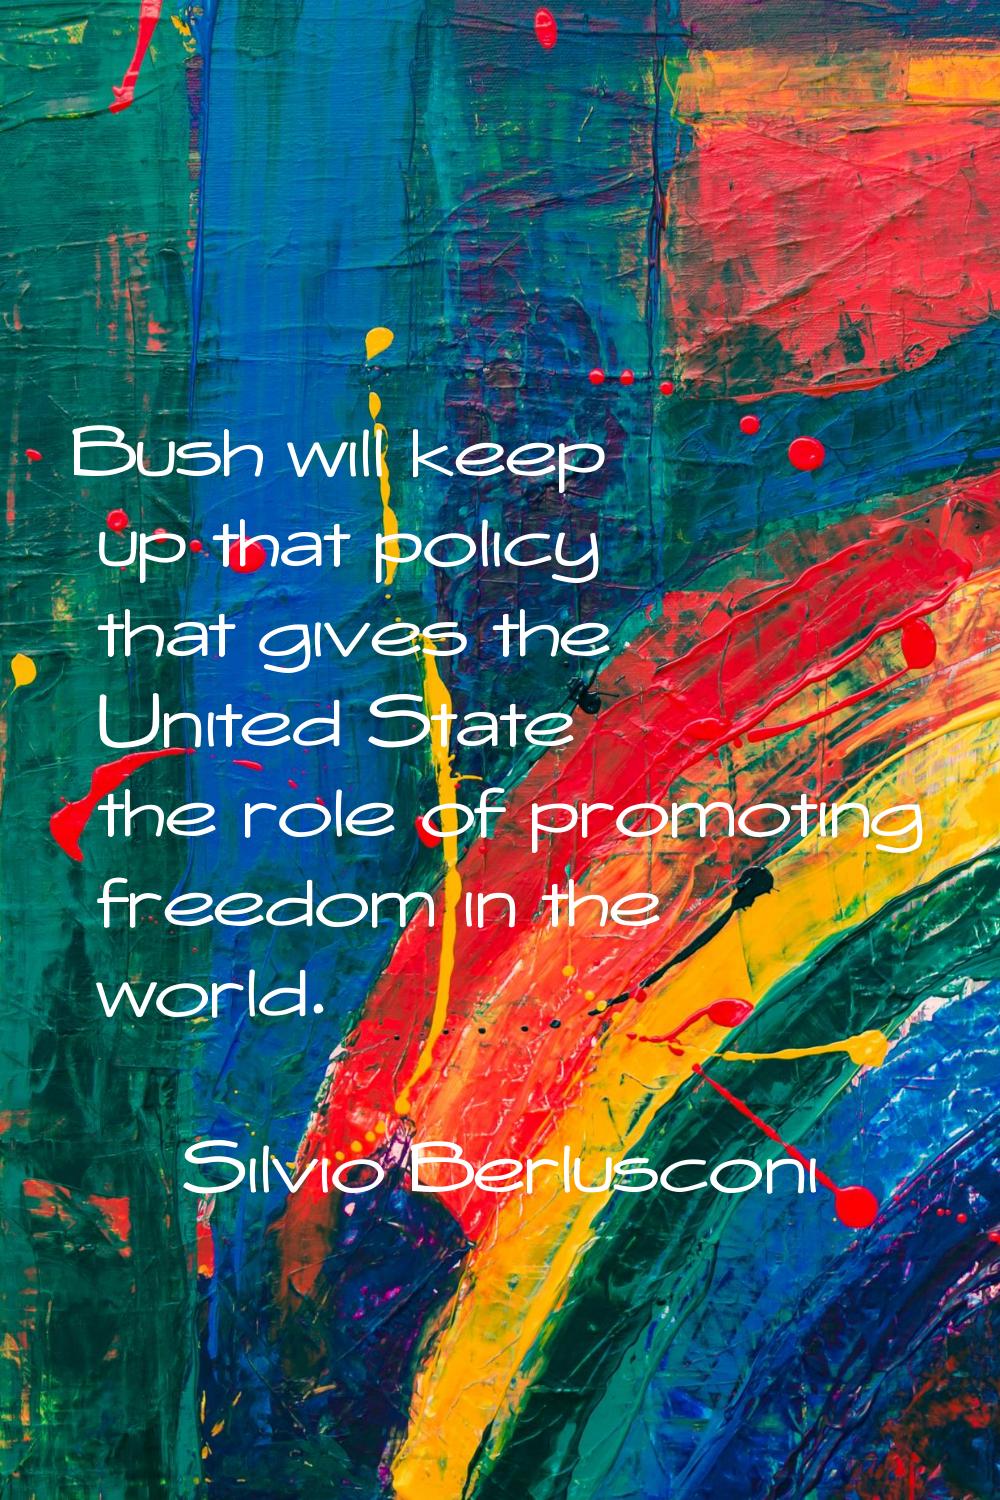 Bush will keep up that policy that gives the United State the role of promoting freedom in the worl